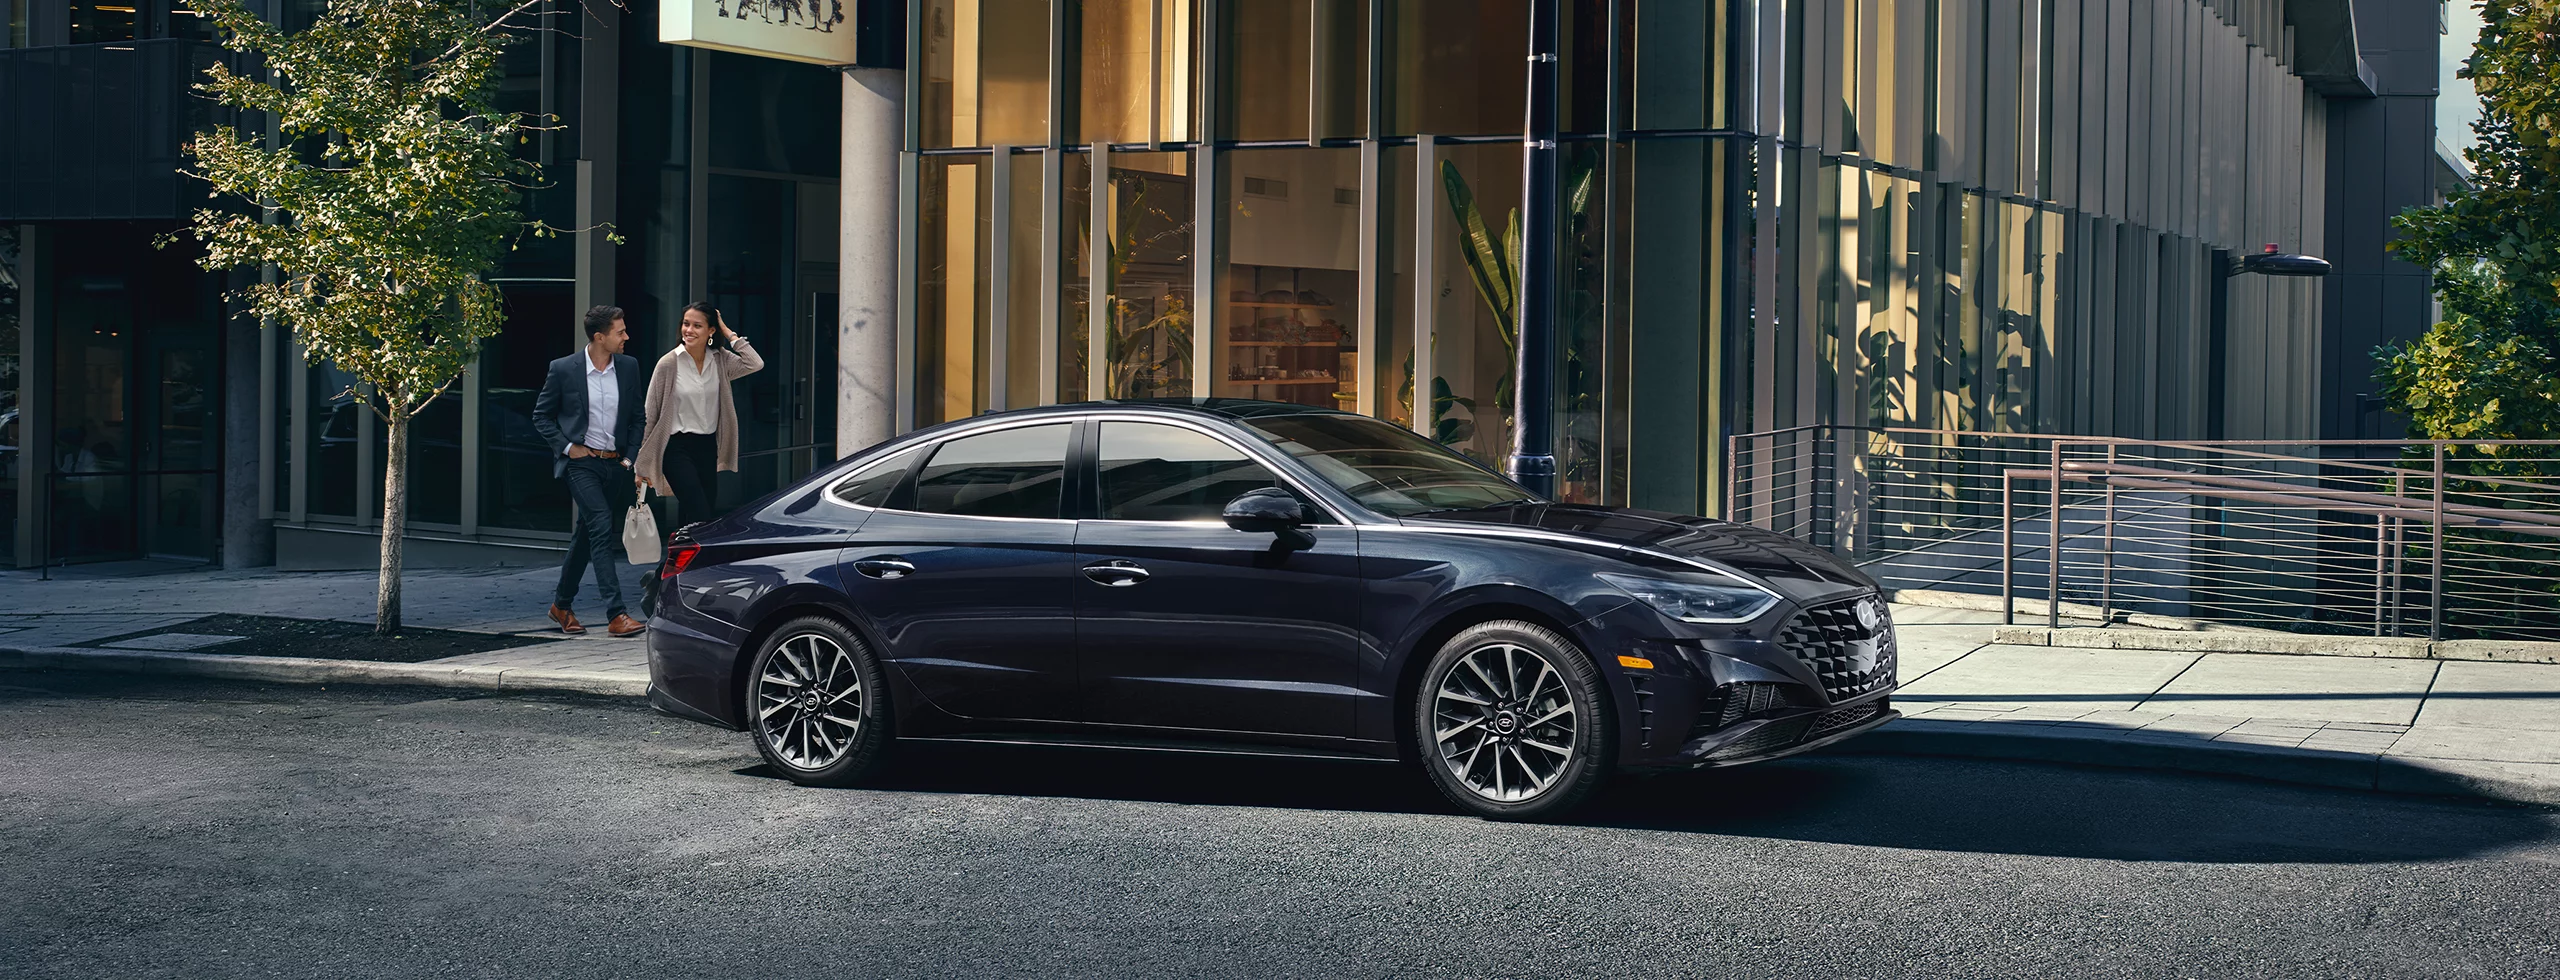 2023 Sonata. The sophisticated, stand-out sedan.